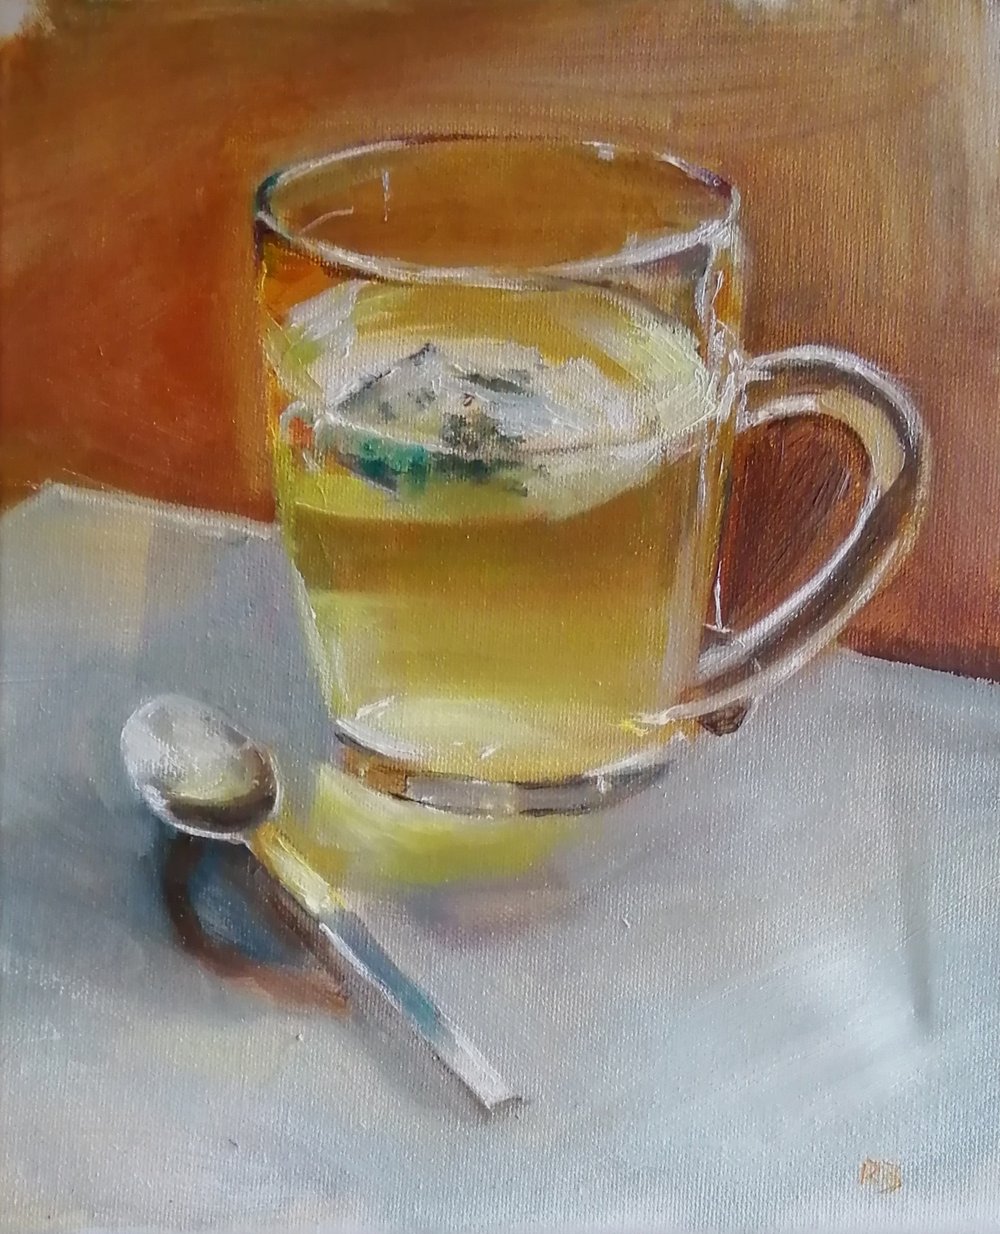  Spoonful  Oil on canvas  26x31cm  £400 